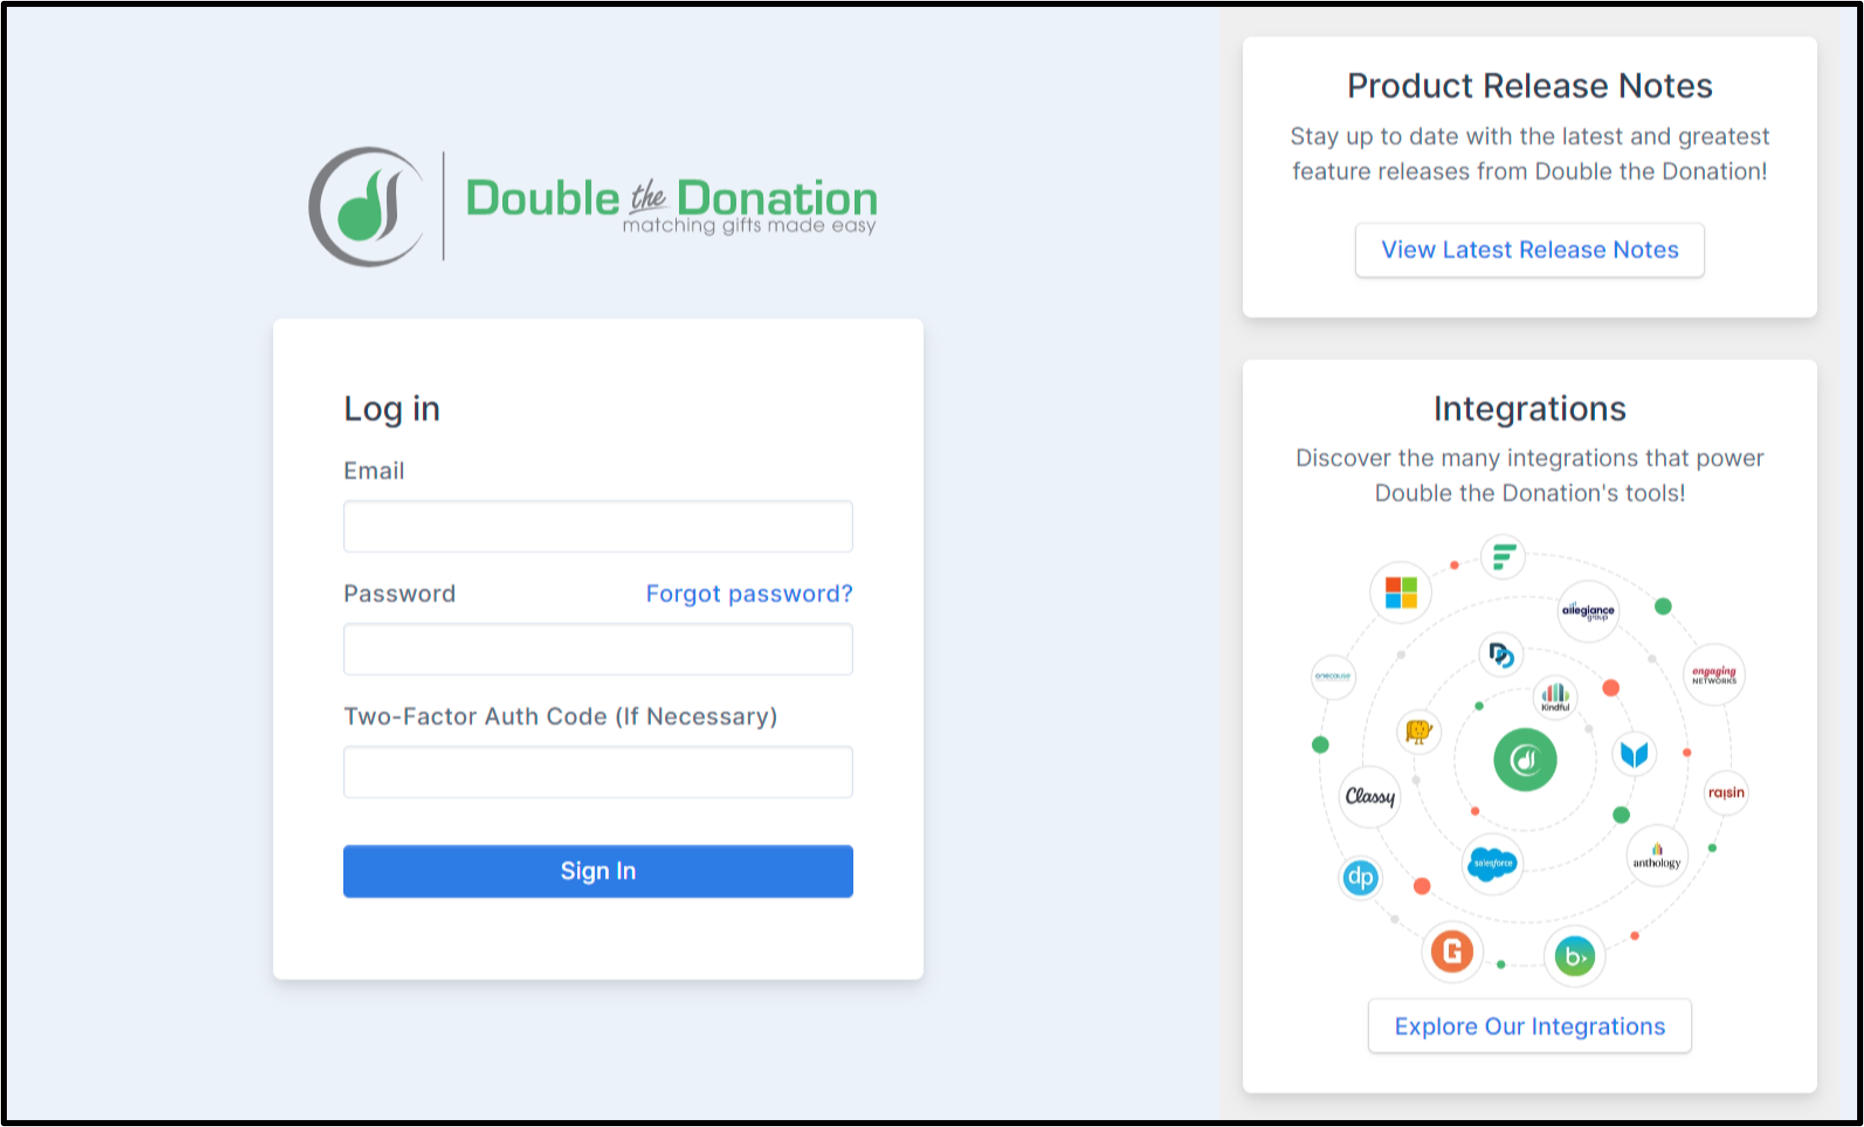 The new Double the Donation account login screen is your new hub for quick links to the most exciting updates from our team.